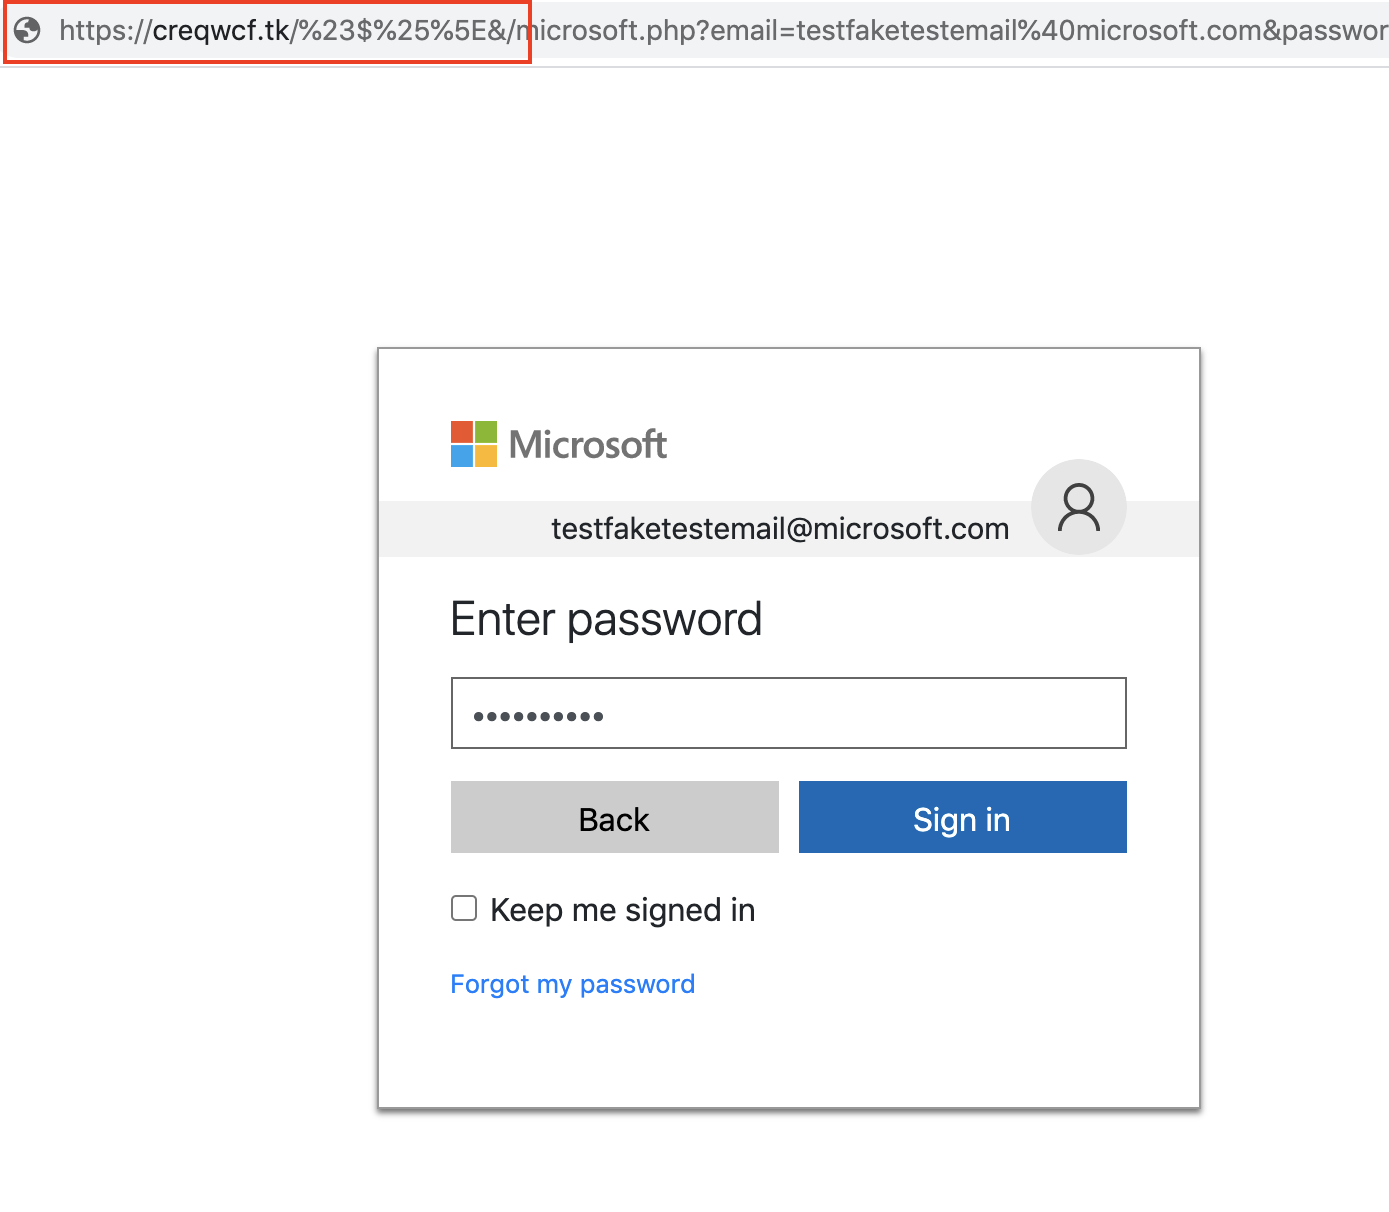 To closely imitate login.live.com, the “Enter password” page comes after the user enters a valid username. Note the URL, outlined in red, which indicates a scam site.